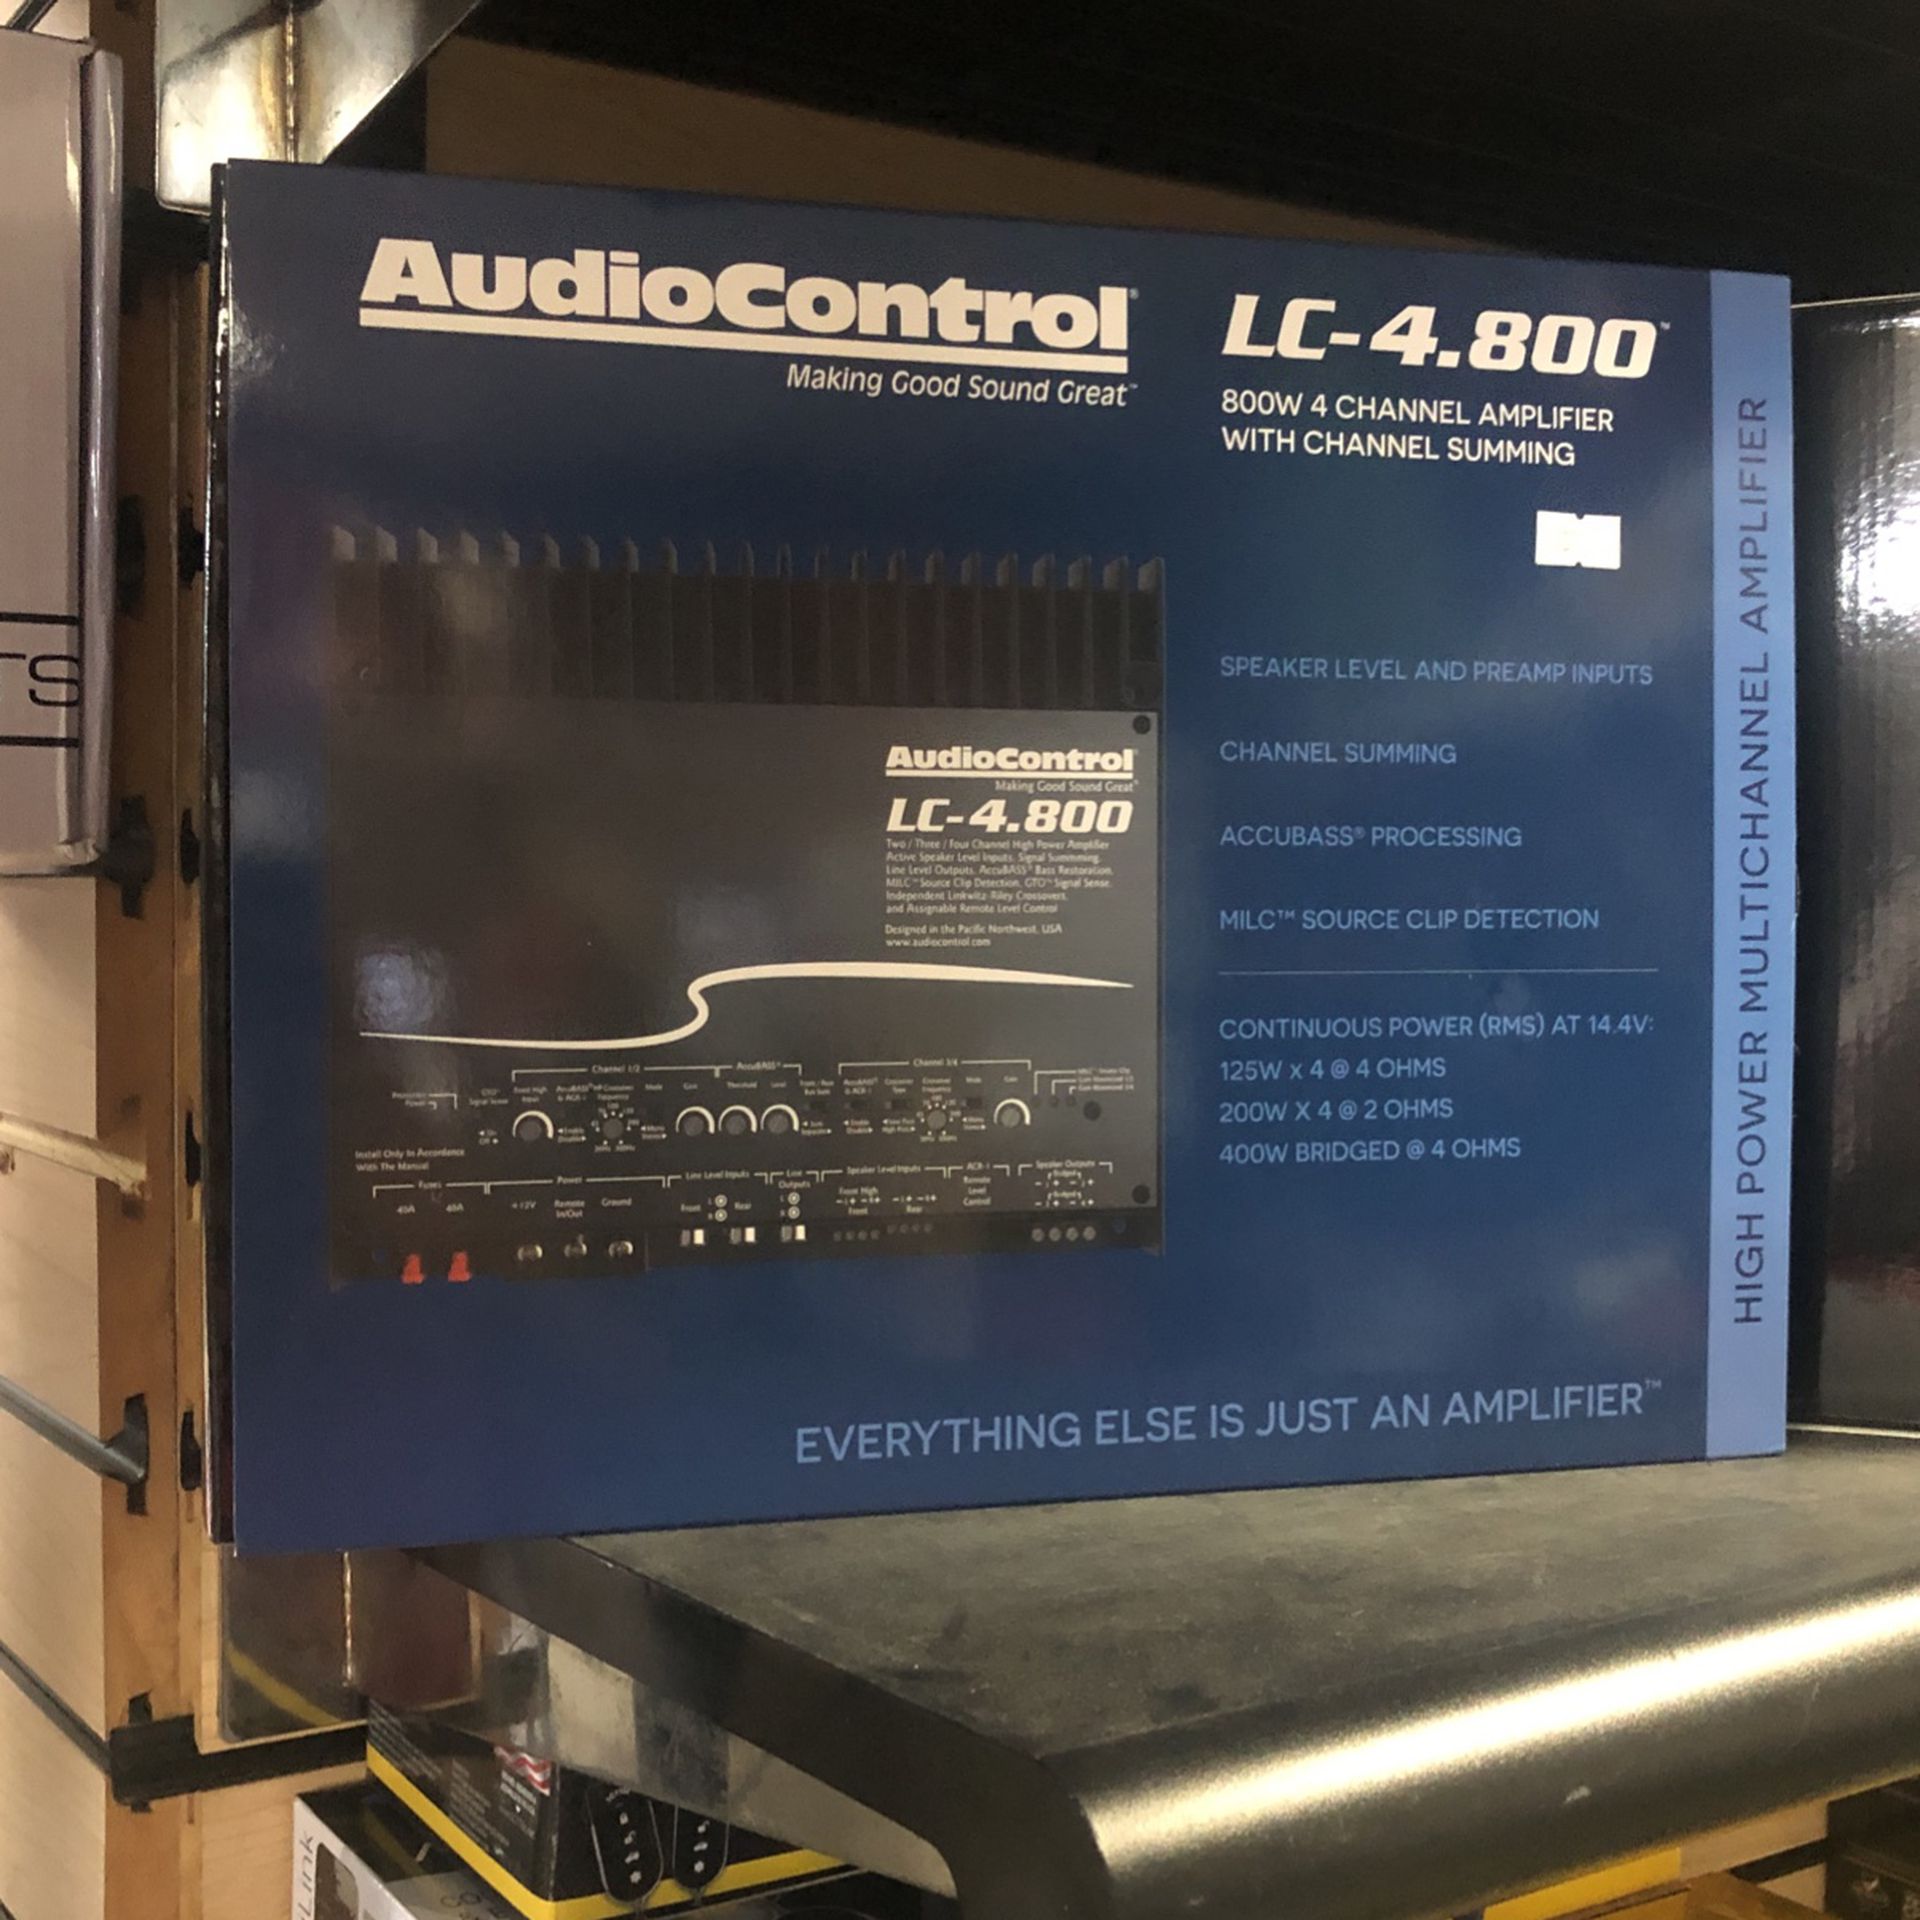 Audiocontrol Lc-4.800 On Sale Today For 429.99